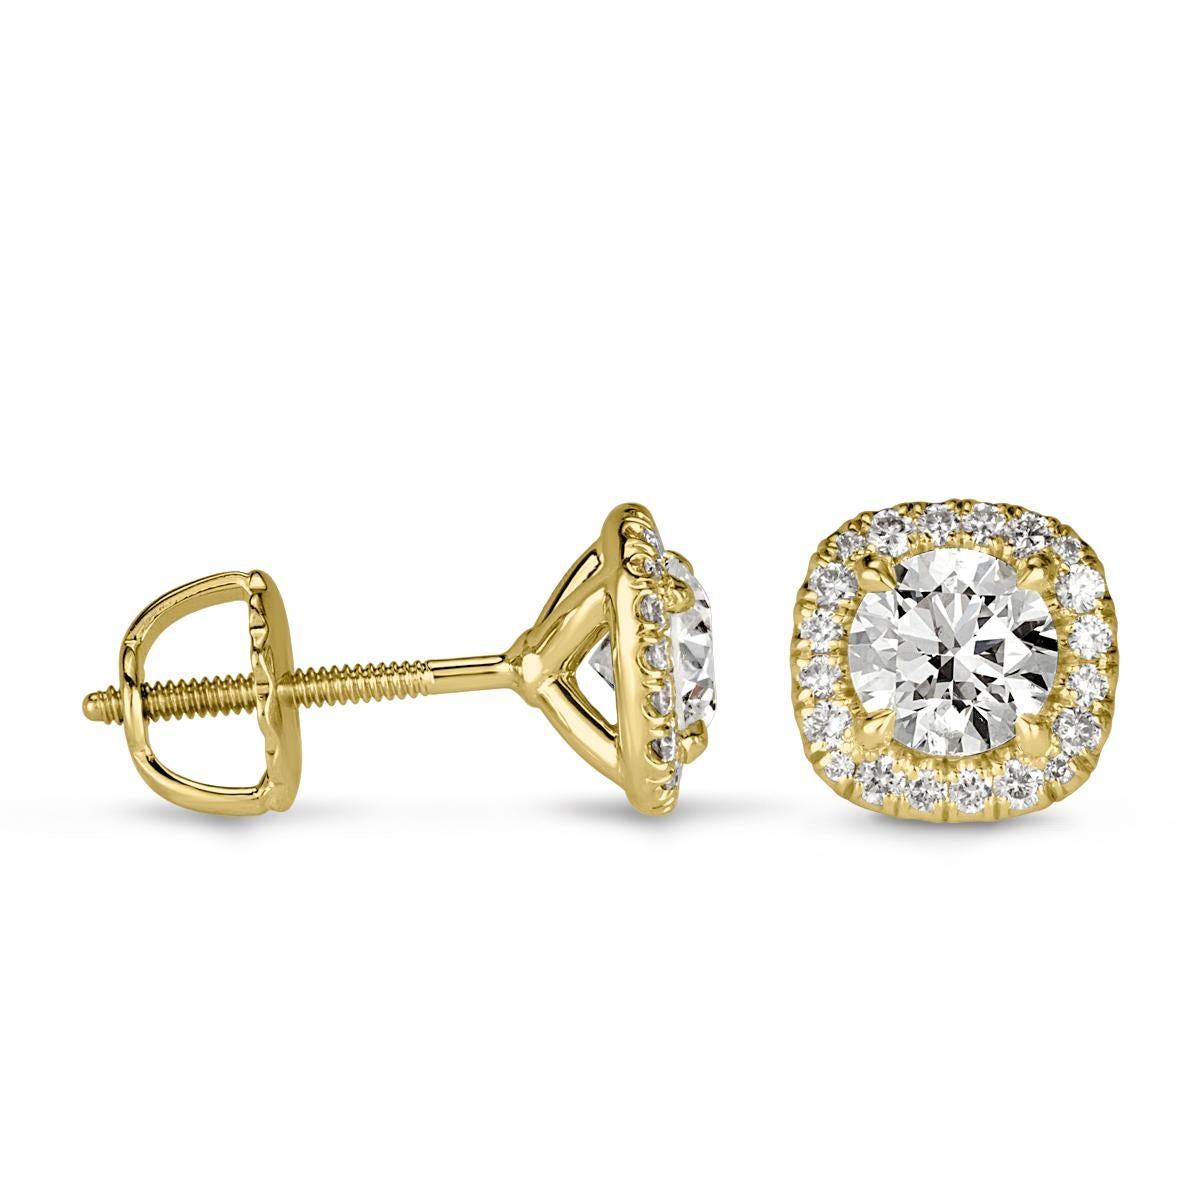 Created in 18k yellow gold, this ravishing pair of diamond stud earrings showcases two round brilliant cut center diamonds each complimented by a micro pavé halo. The diamonds total 1.00ct in weight and are graded at E-F, VS1-VS2.
